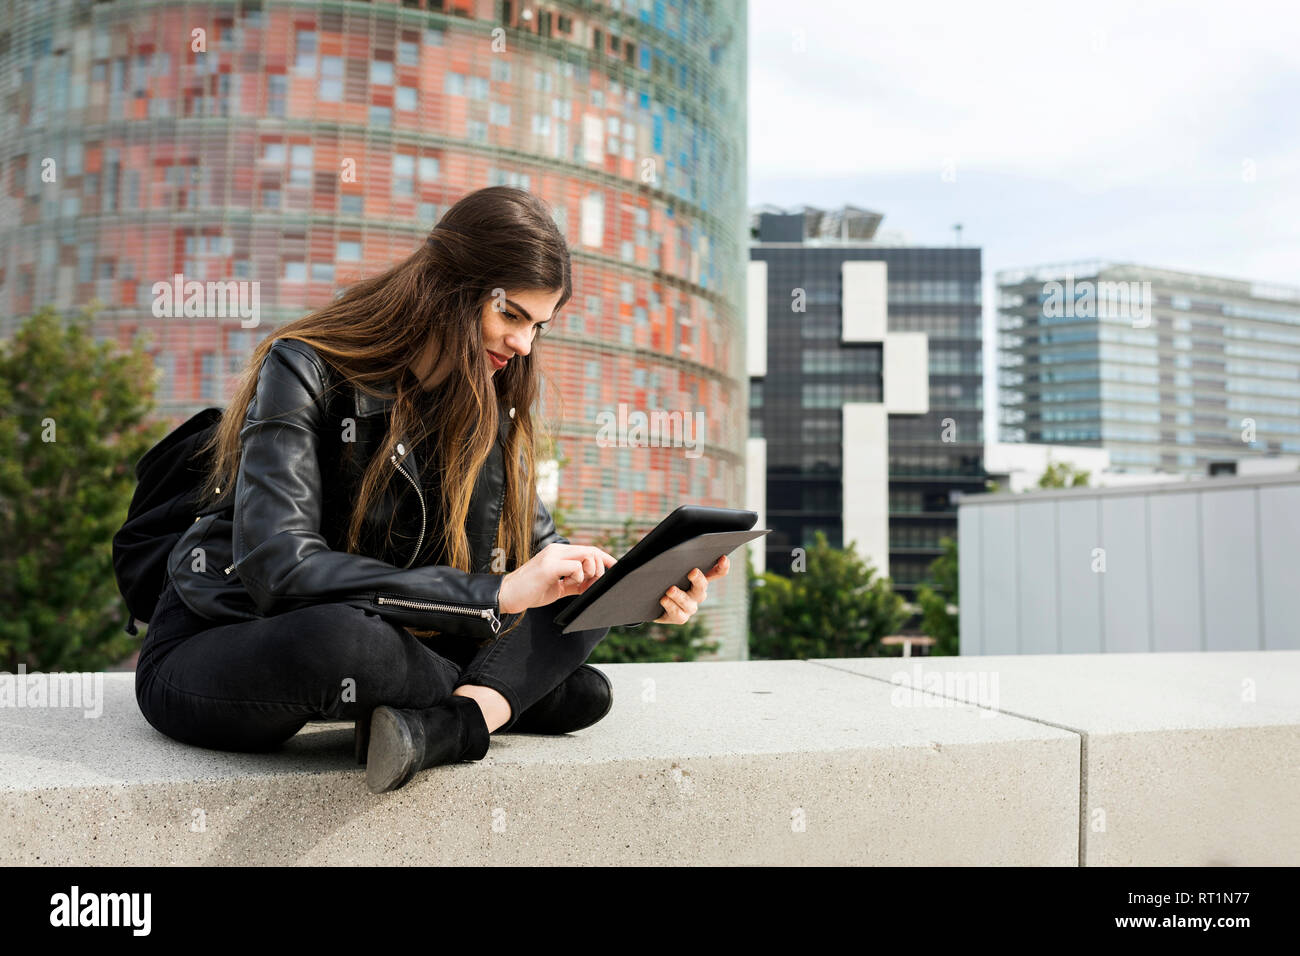 Spain Barcelona, young woman sitting in the city using tablet Stock Photo